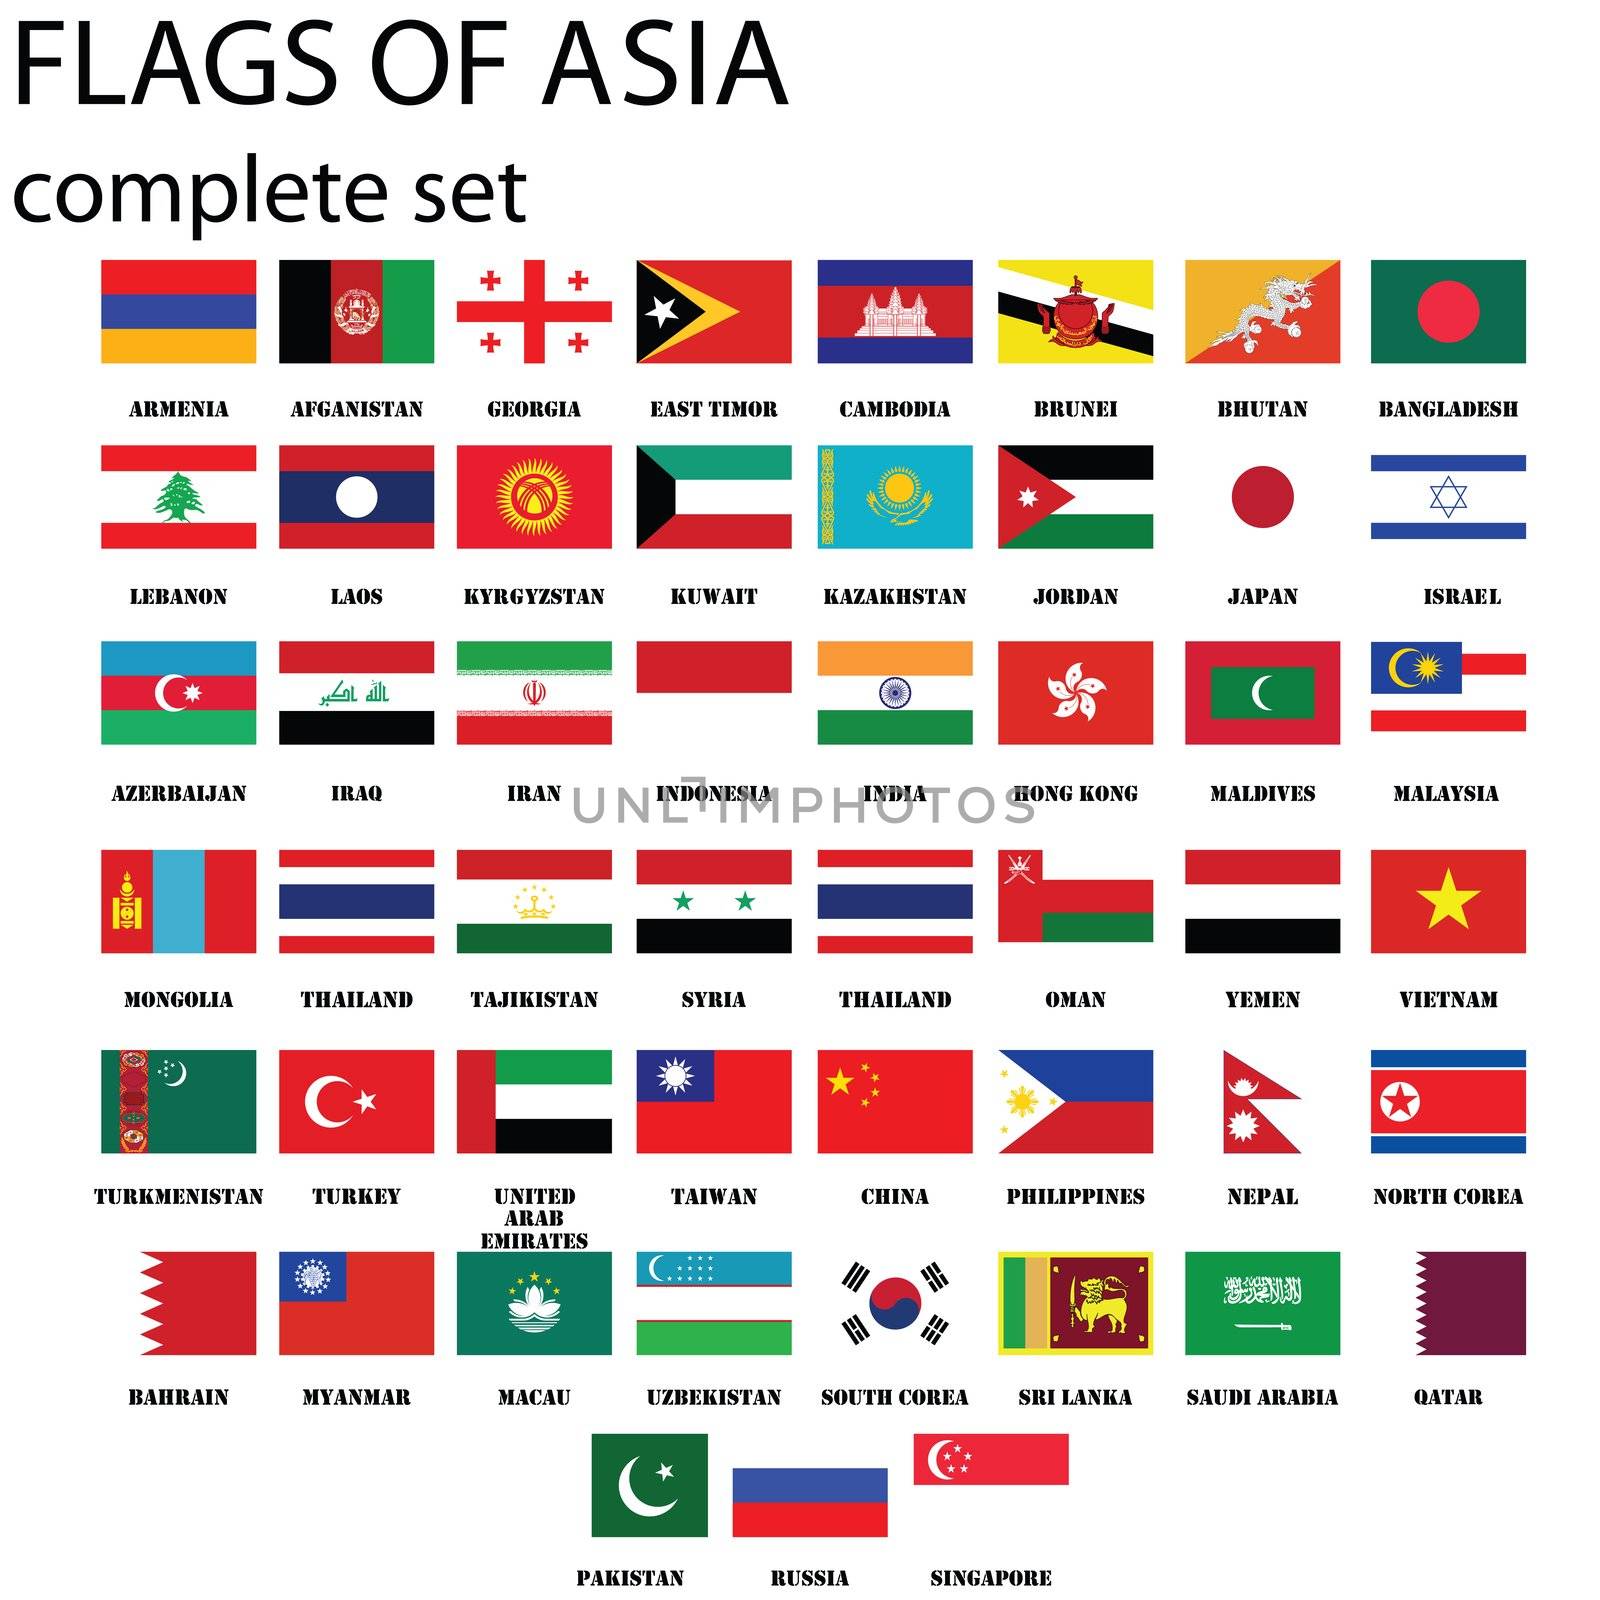 Asia flags by Lirch